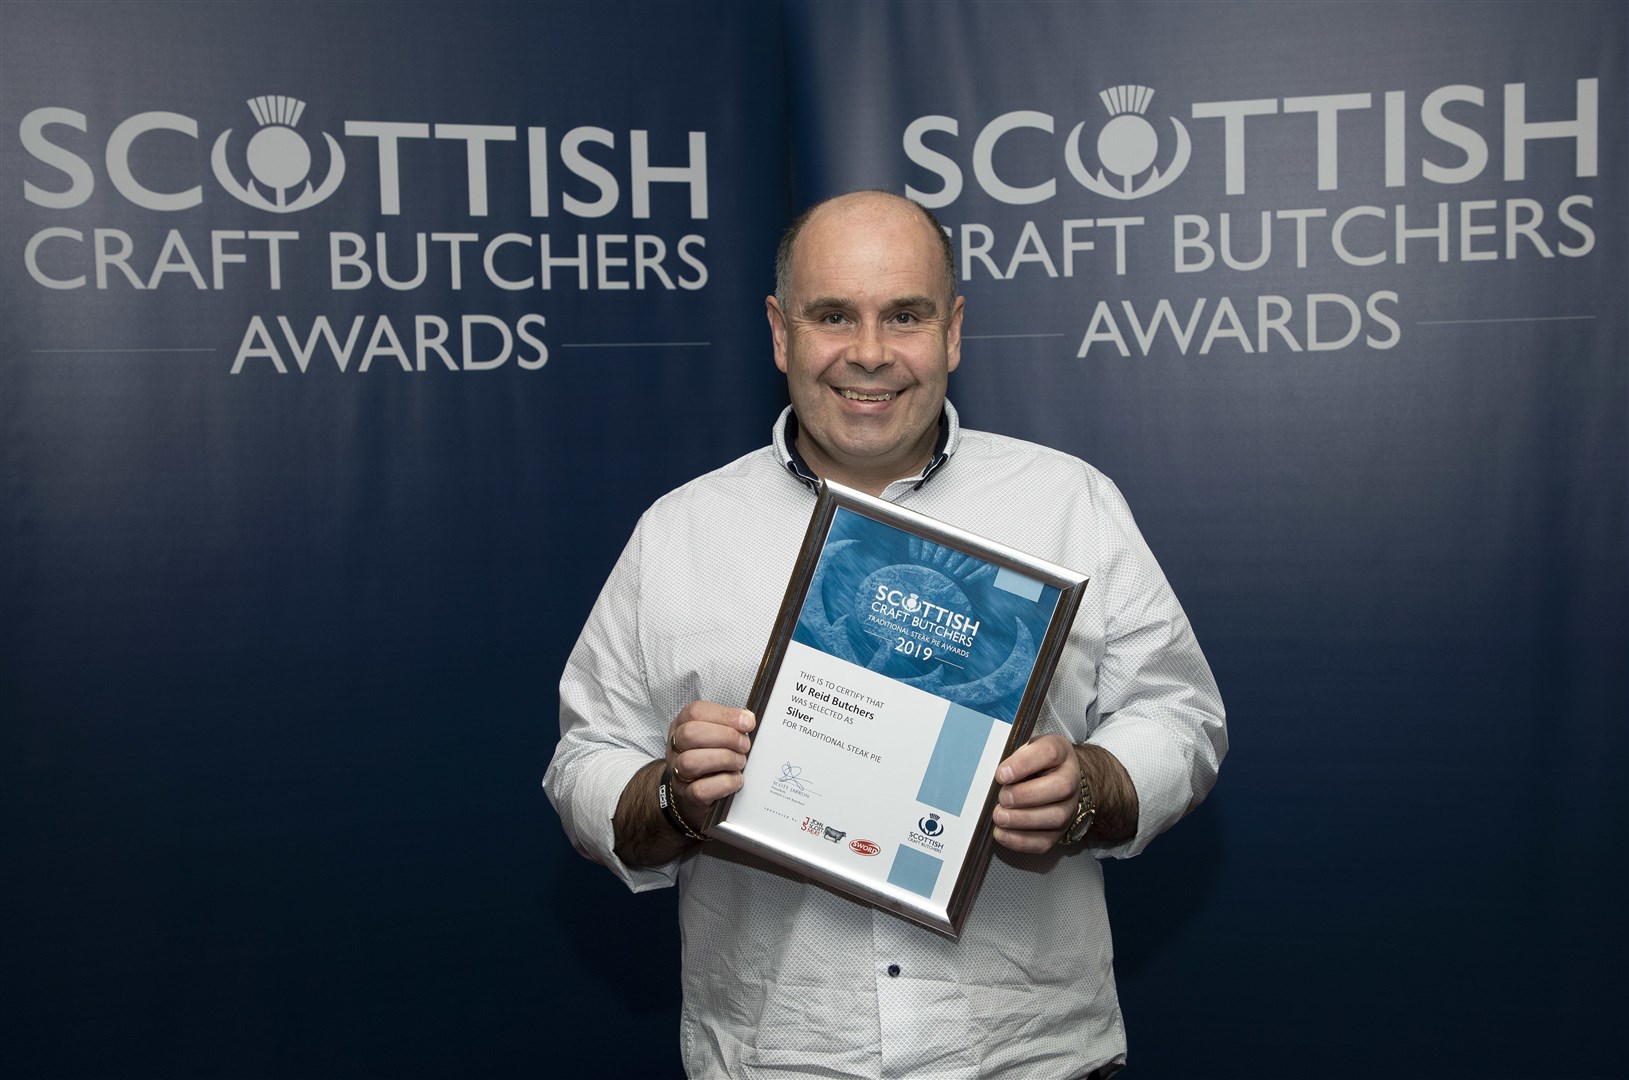 Phillip Robertson, from Hopeman's W Reid Butchers, with the award.